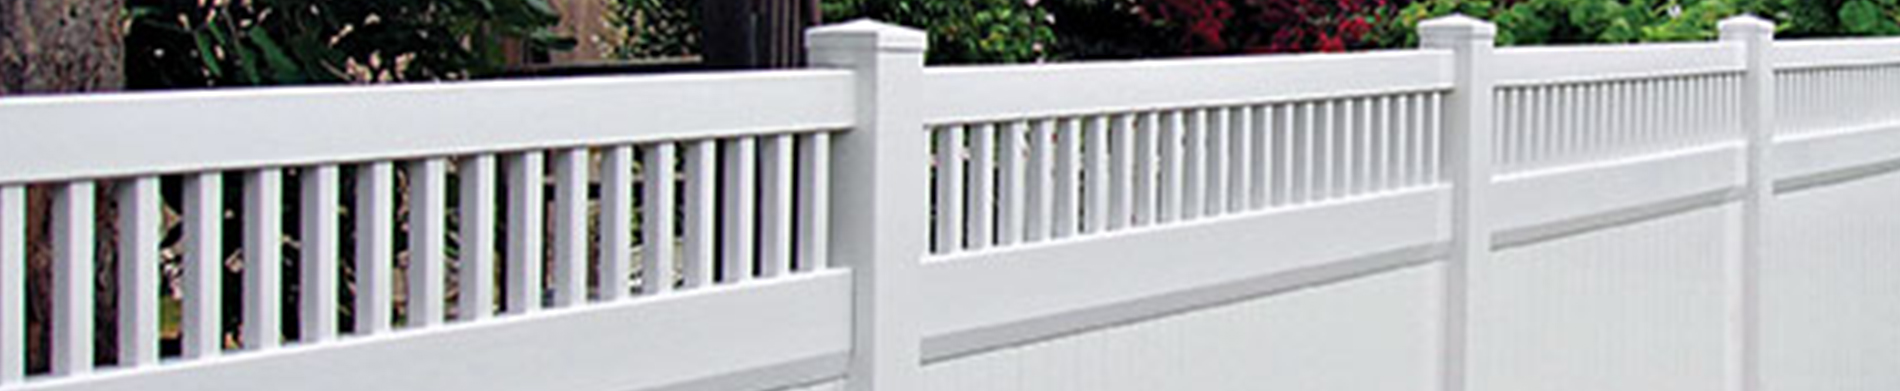 Why Should You Invest In Vinyl Privacy Fences And Not Wood?